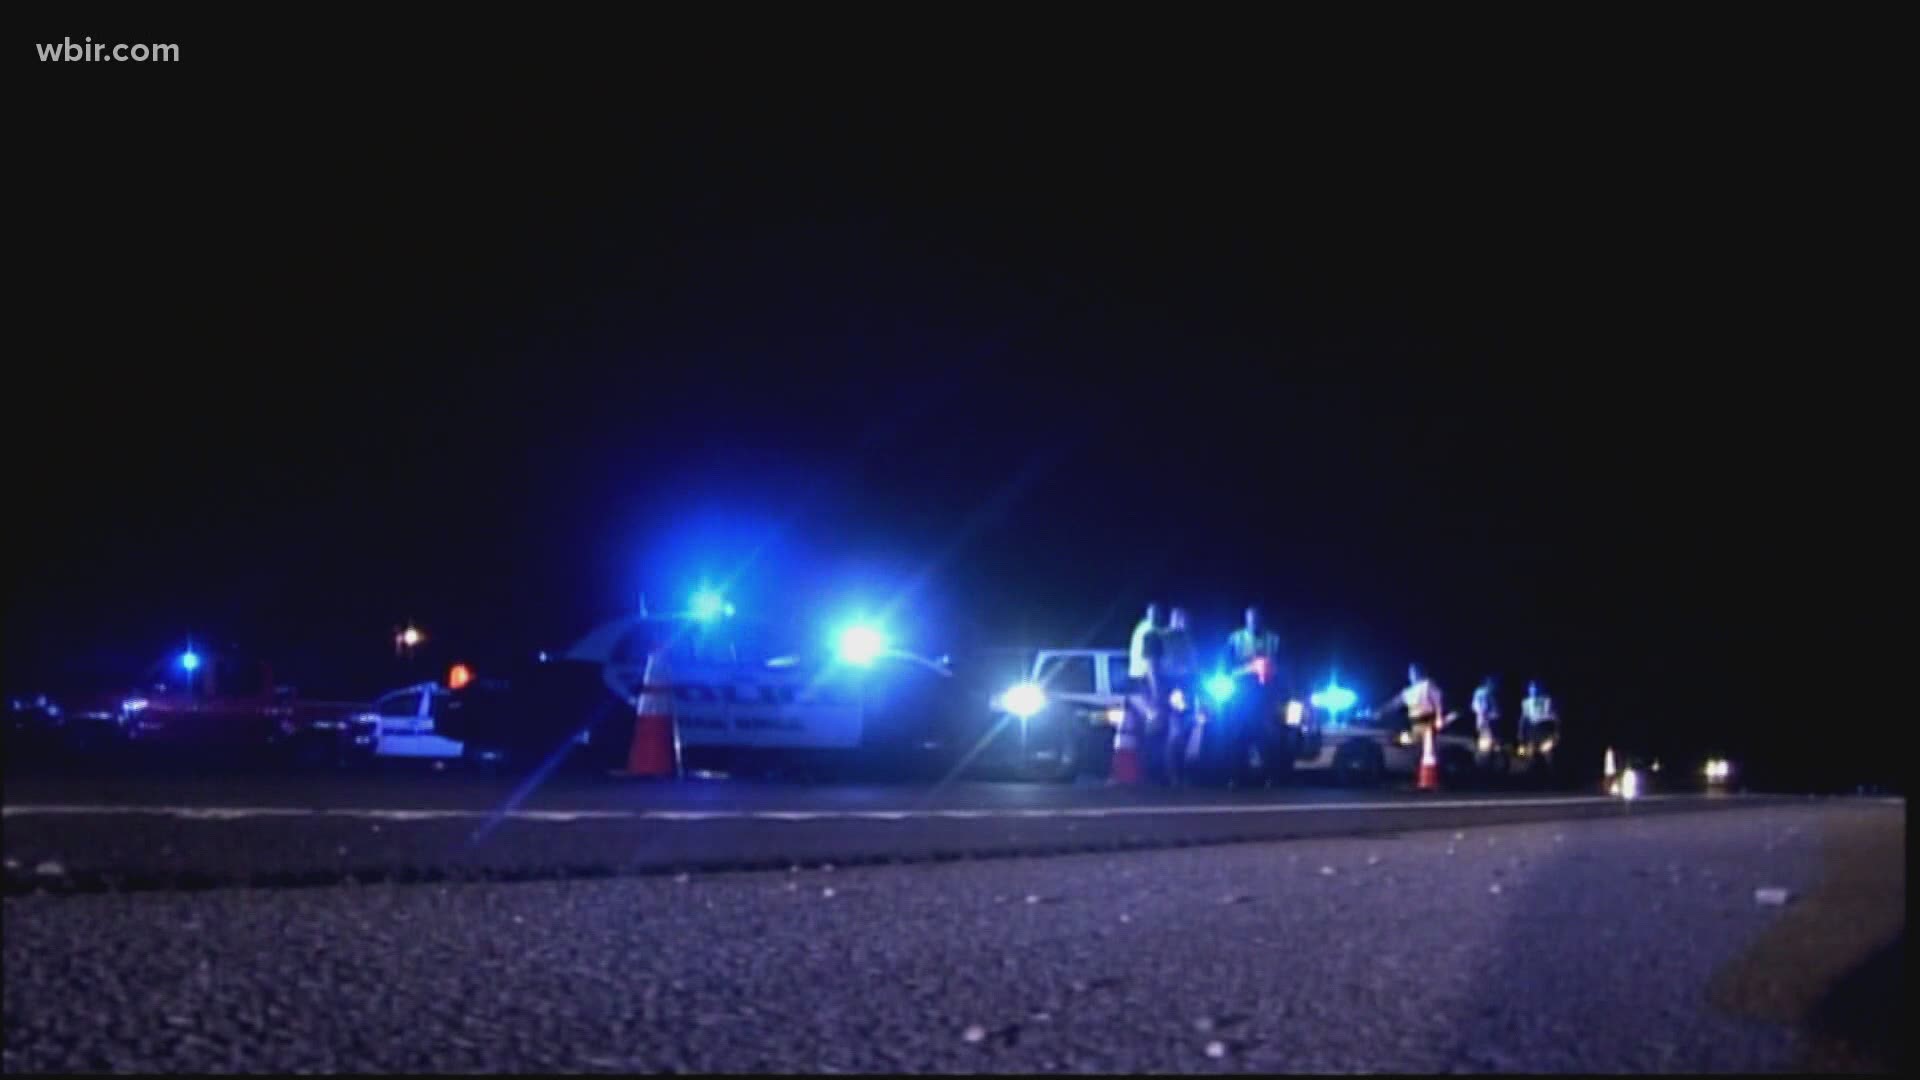 More police are on the roads ahead of the Memorial Day weekend, and officials are urging people not to drink and drive.